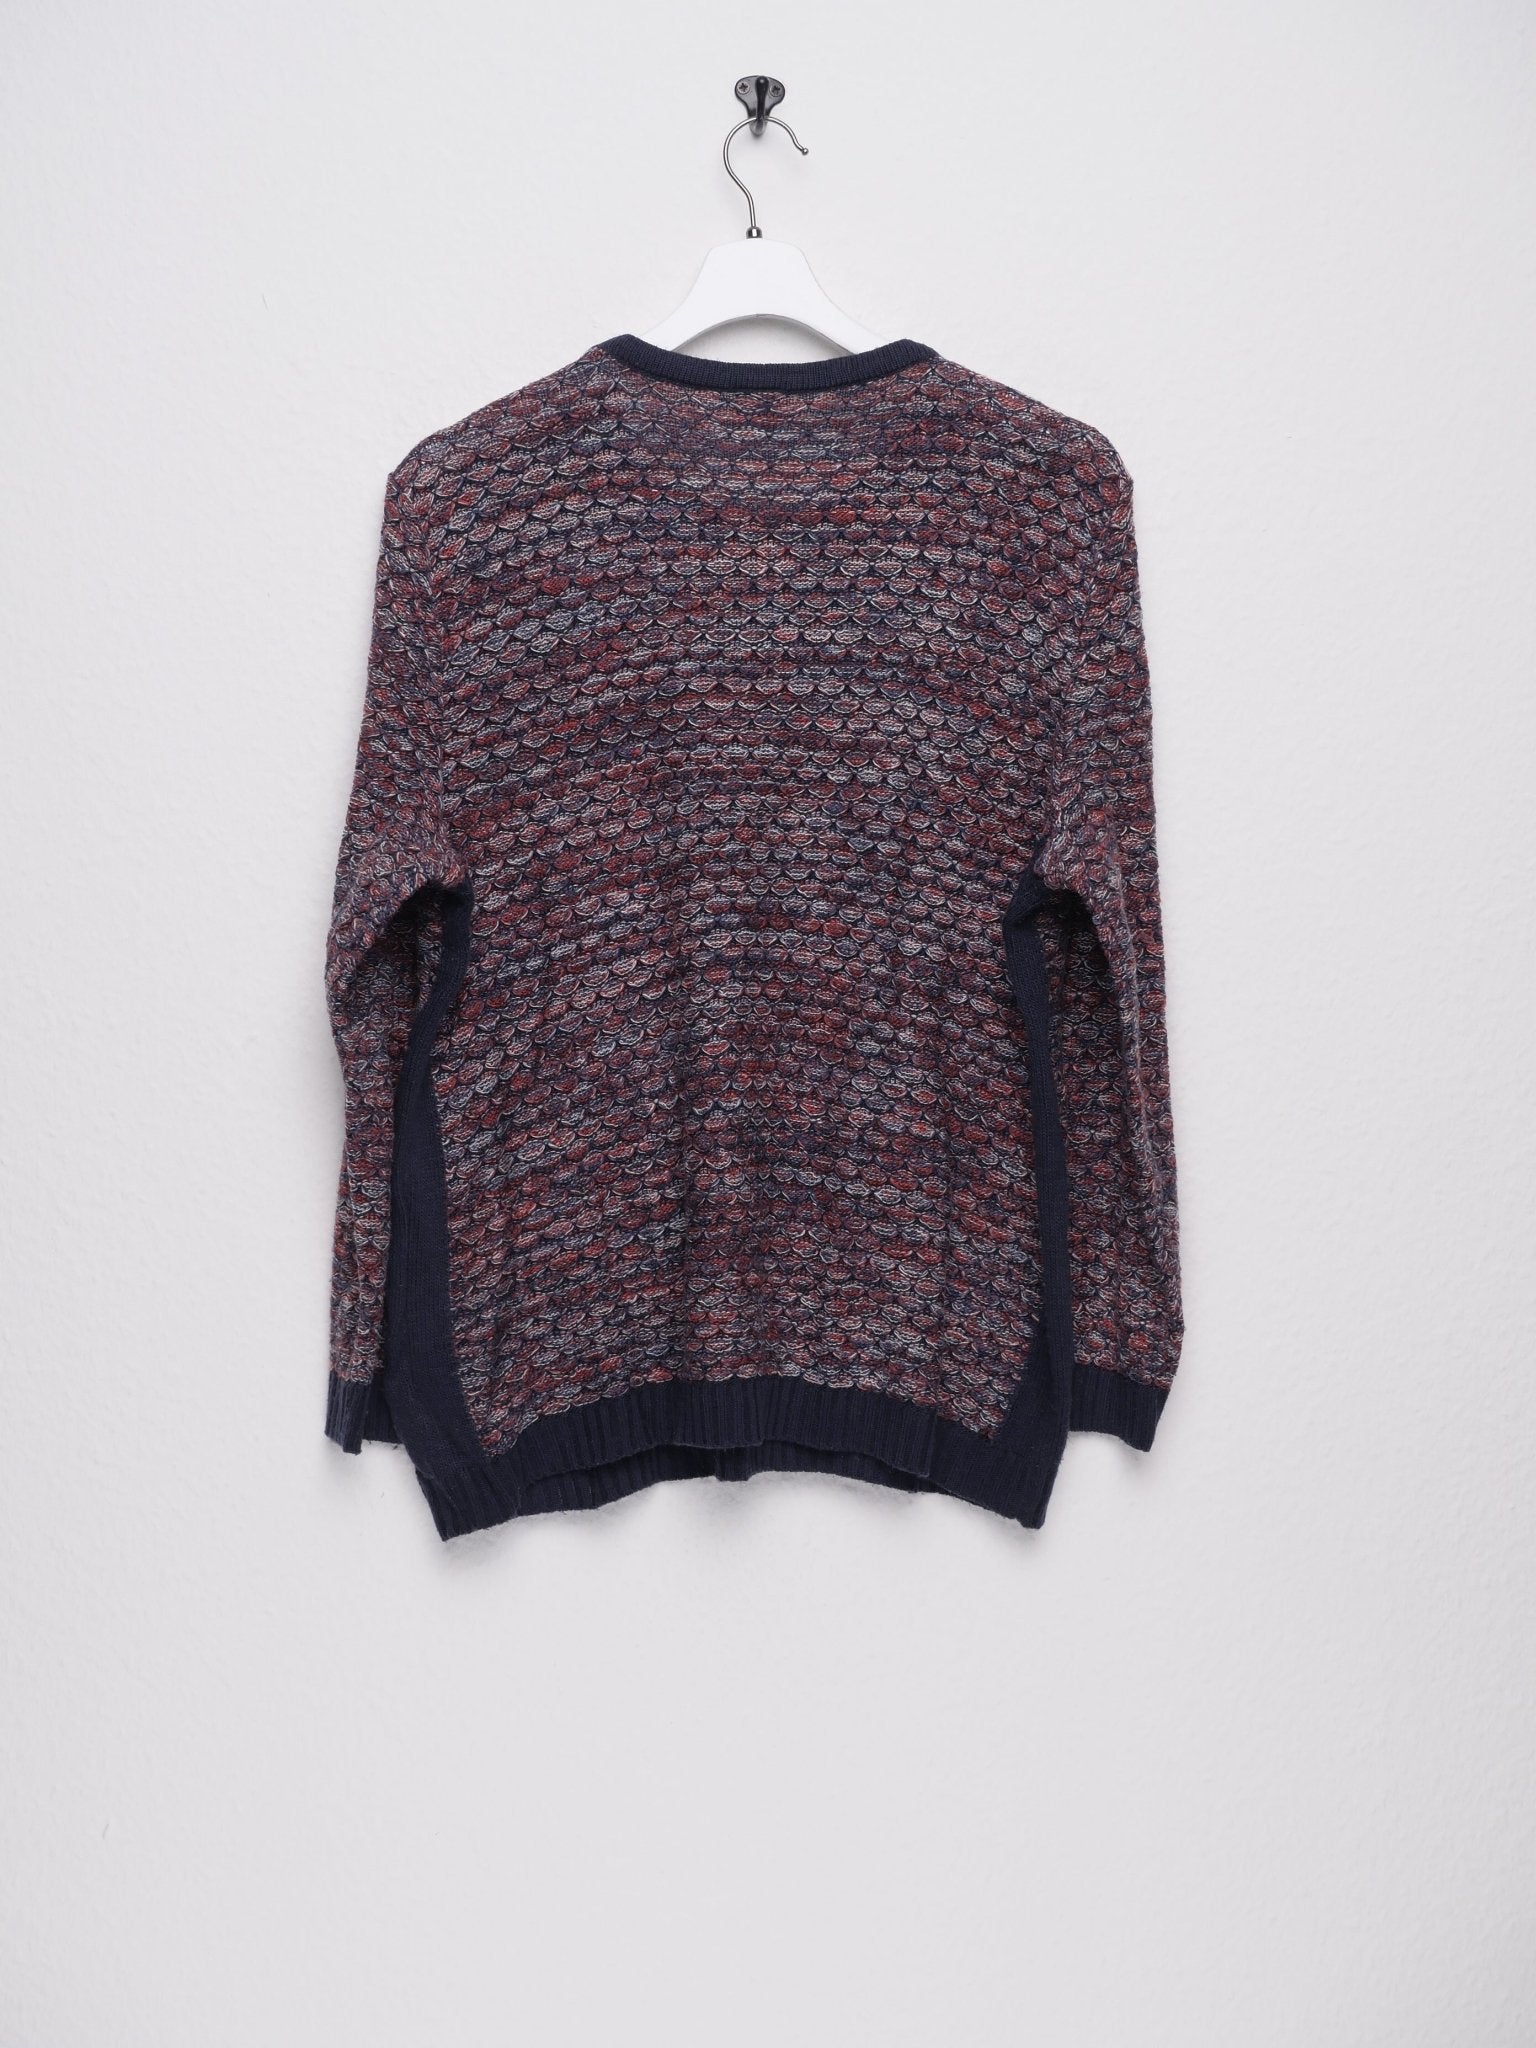 patterned Vintage Knit Sweater - Peeces